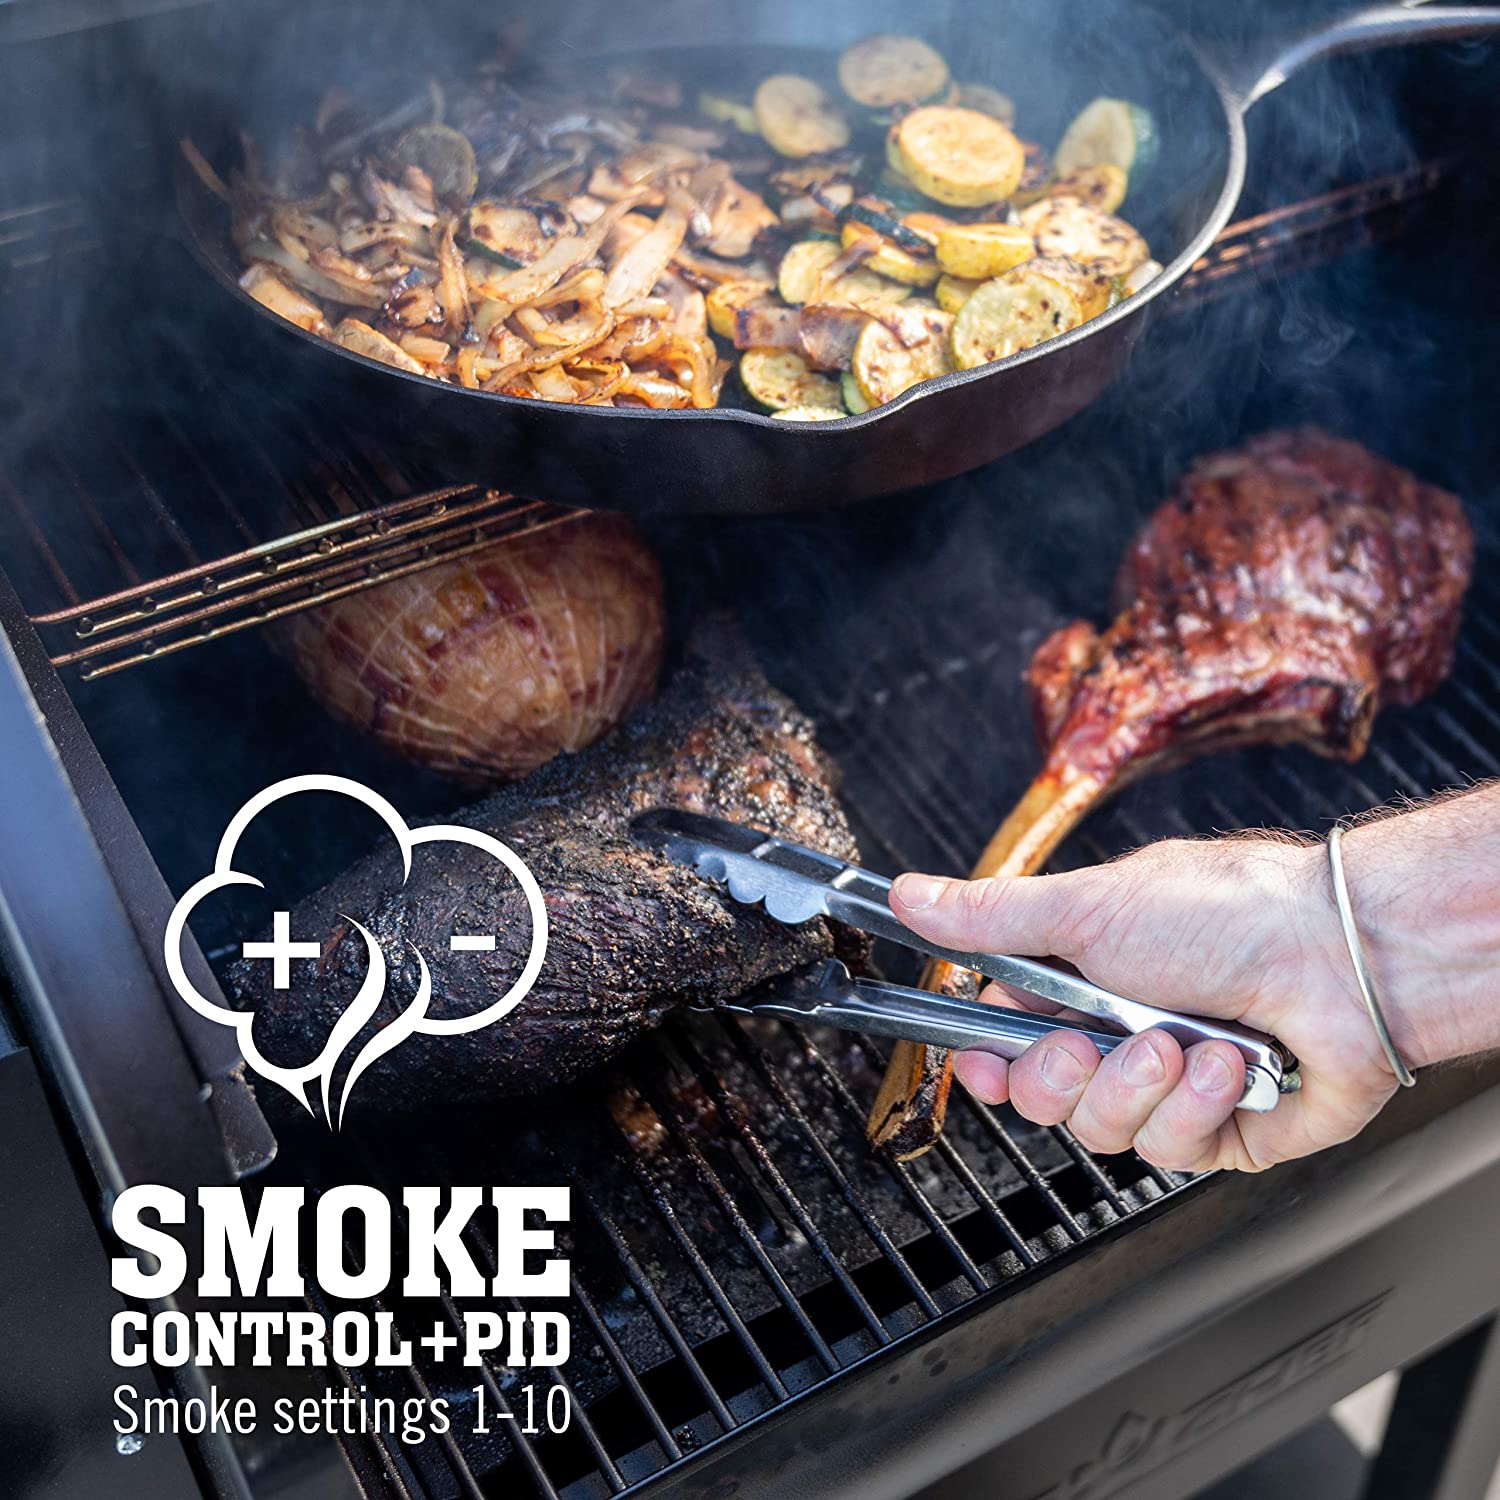 Standout feature of Camp Chef Gen 2 DLX SmokePro Pellet Grill